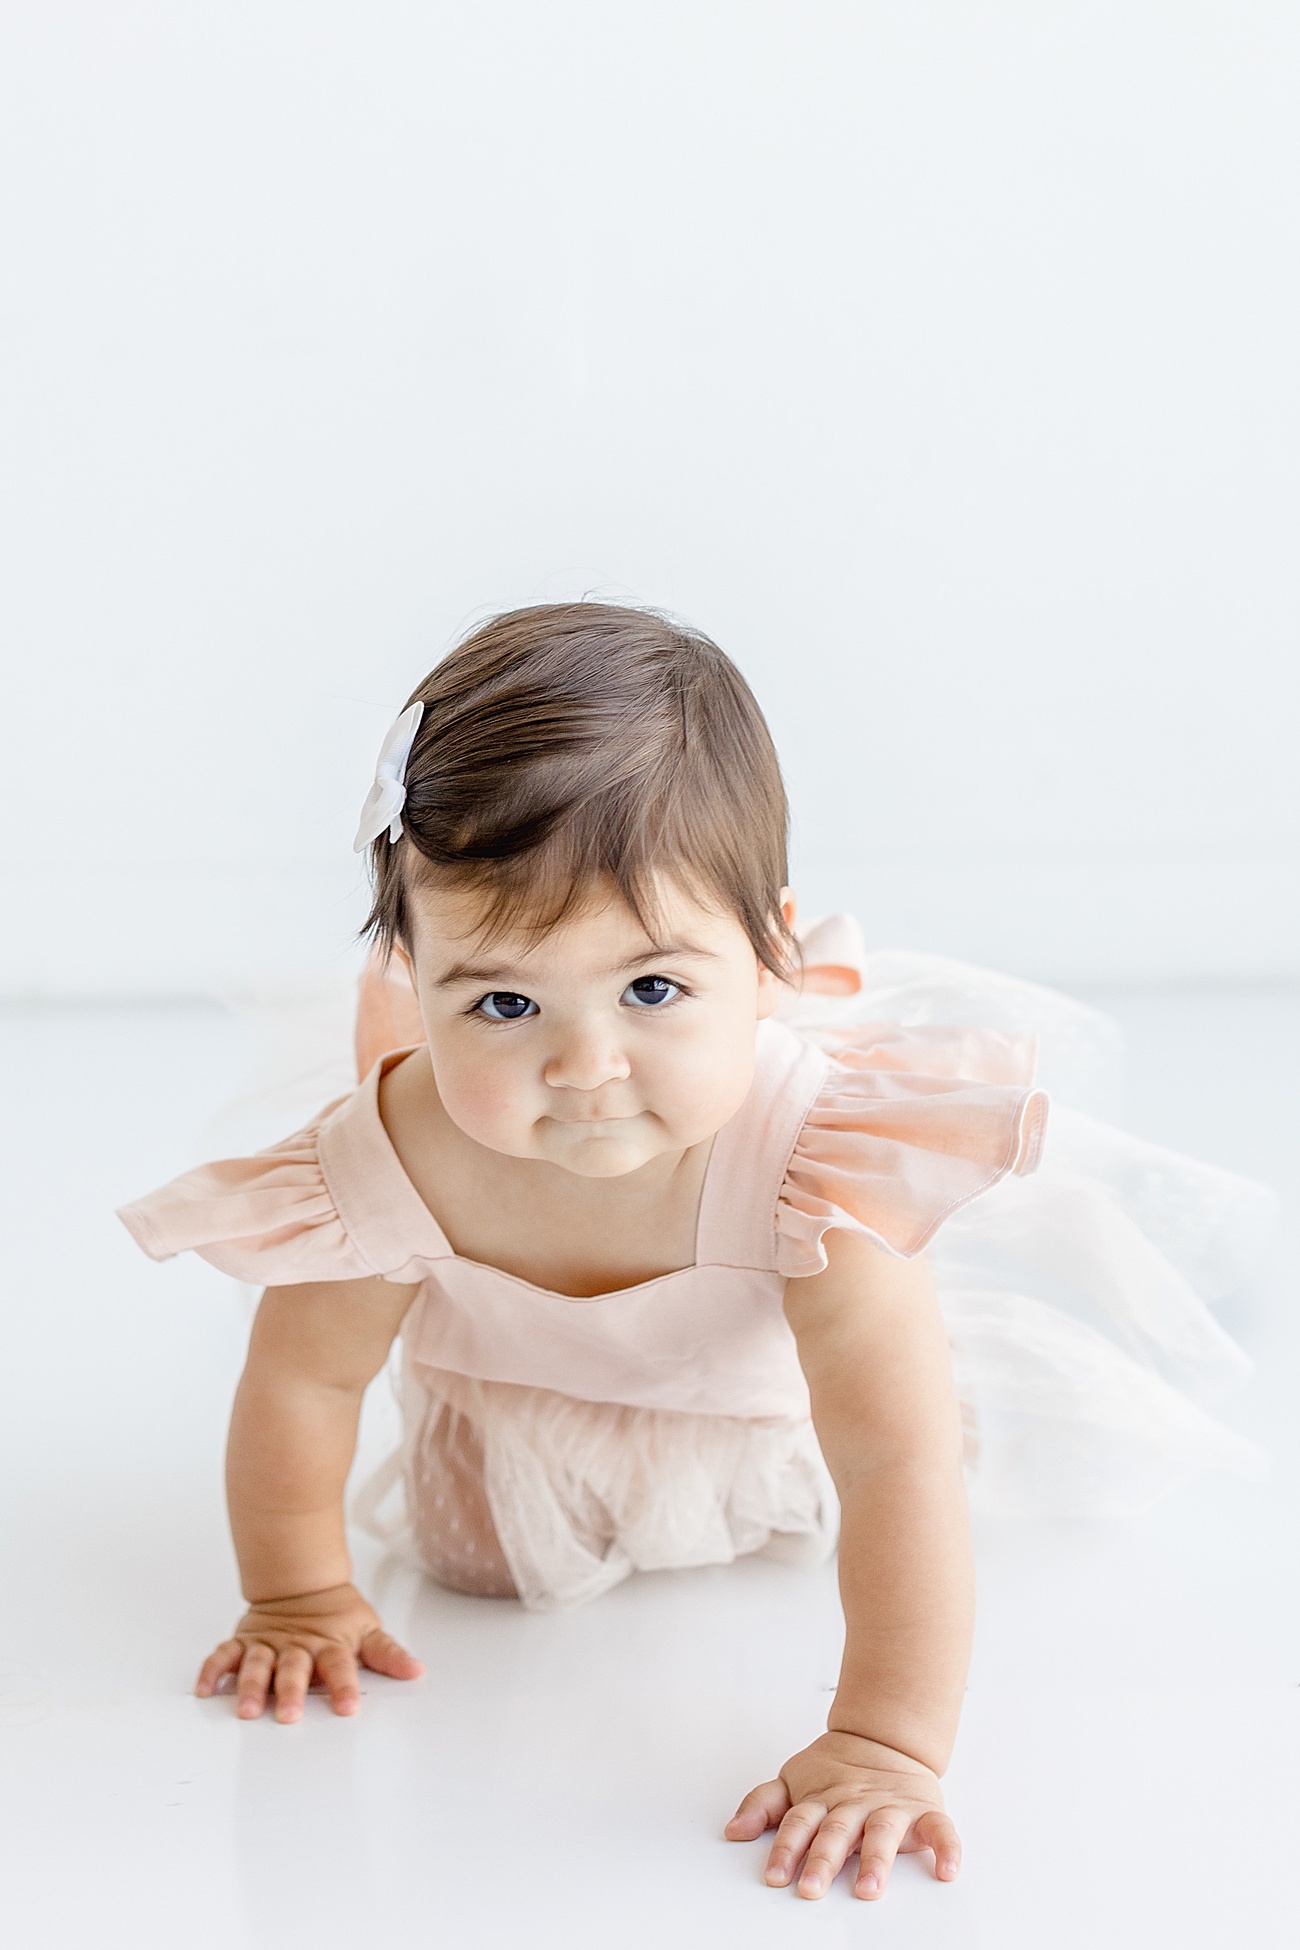 One year old crawling in Austin, TX studio. Photo by Sana Ahmed Photography